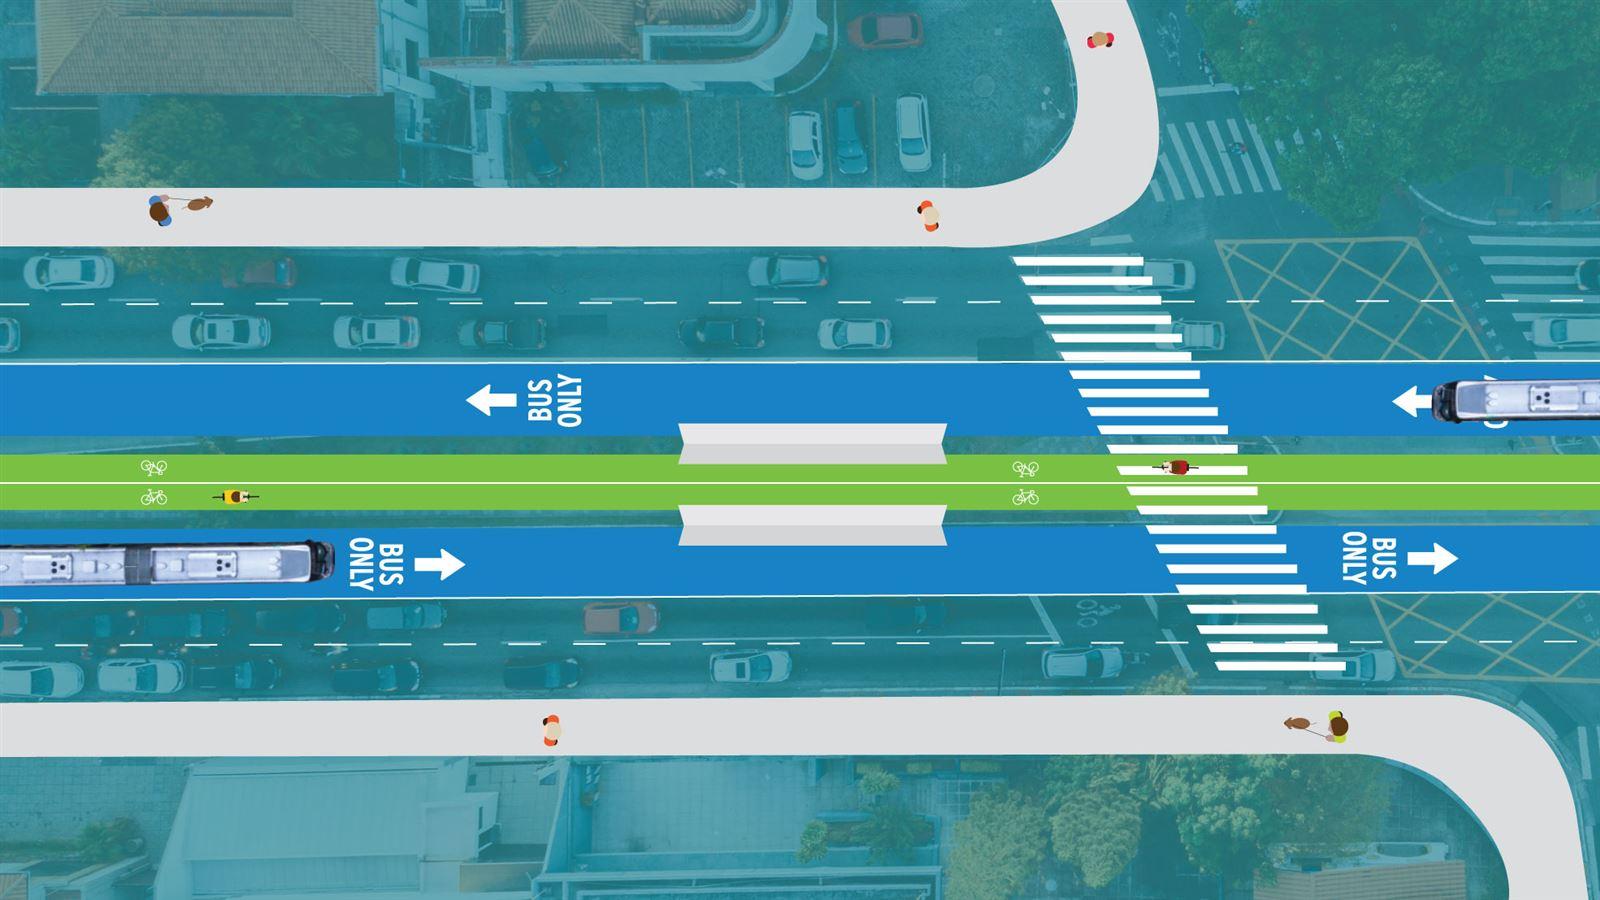 A top-down illustration of bus rapid transit, with dedicated bus and bicycle lanes